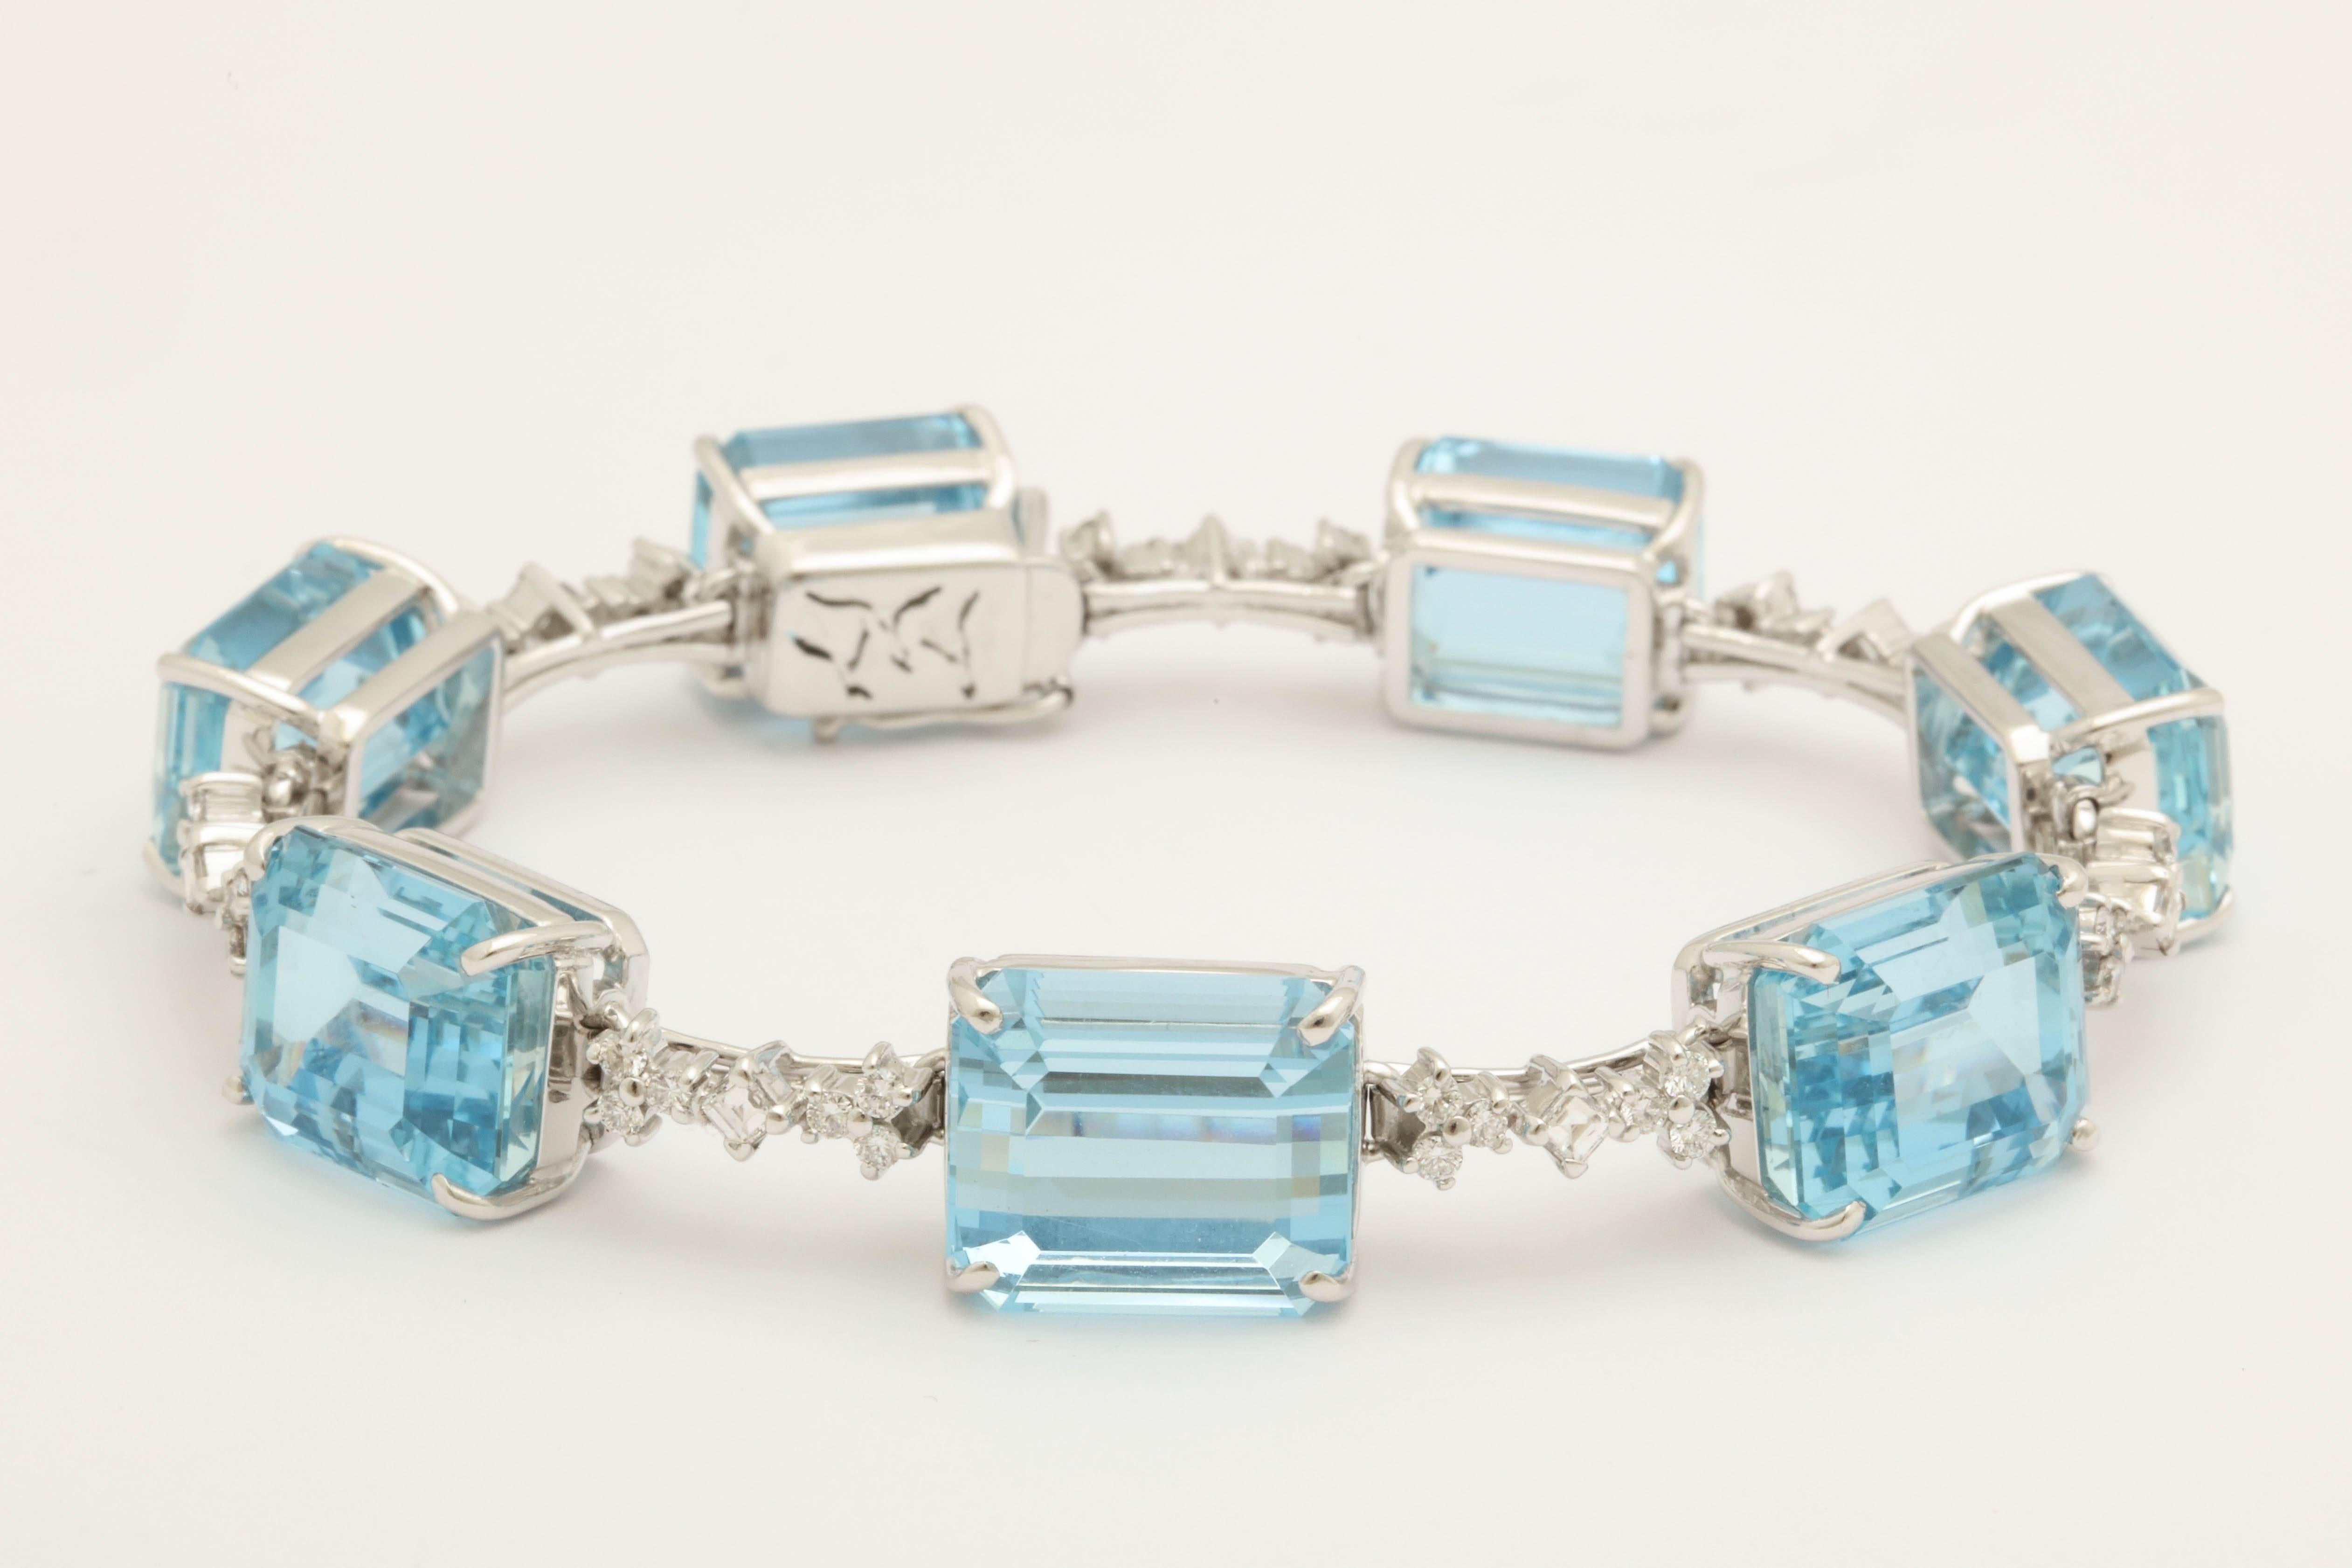 One Ladies 18kt White Gold Flexible Straighline Bracelet Embellished With Seven Rectangular Emerald Cut Gem Quality Aquamarines Weighing Approximately 50 Carats Total Weight, Bracelet Is Further Designed With Brilliant Full Cut Round And Alternating